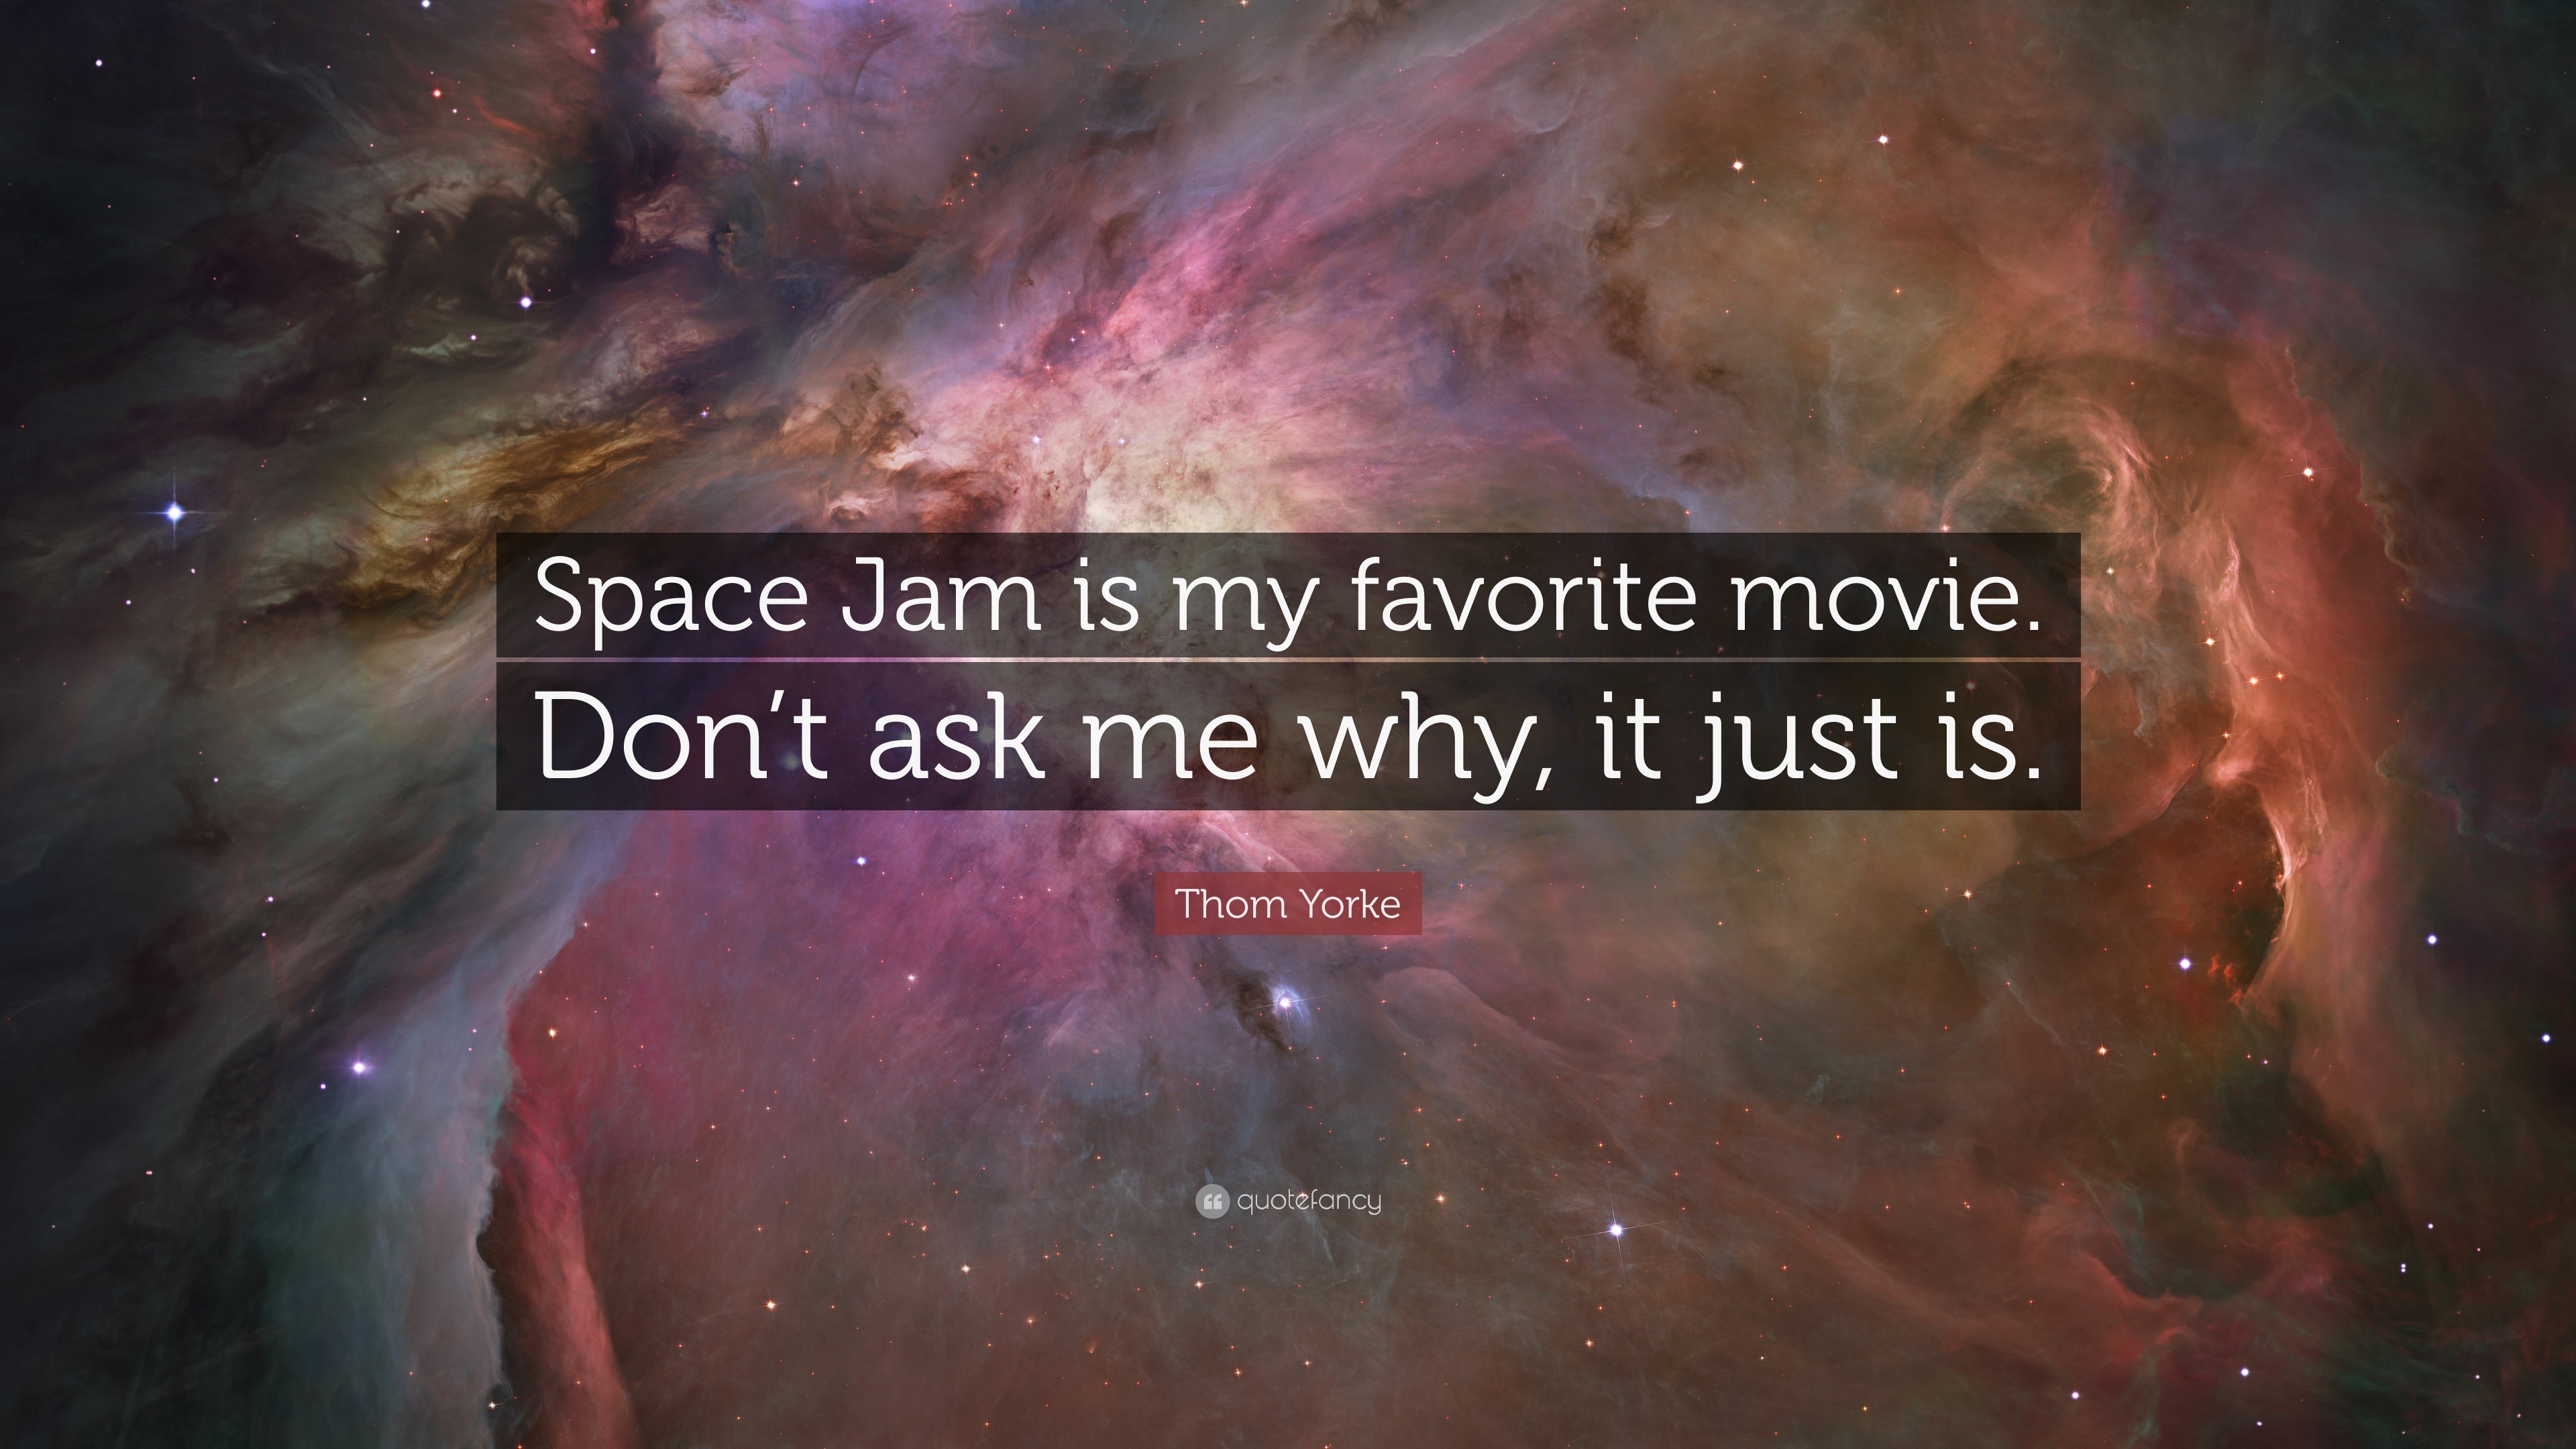 3840x2160 Thom Yorke Quote: “Space Jam is my favorite movie. Don't ask